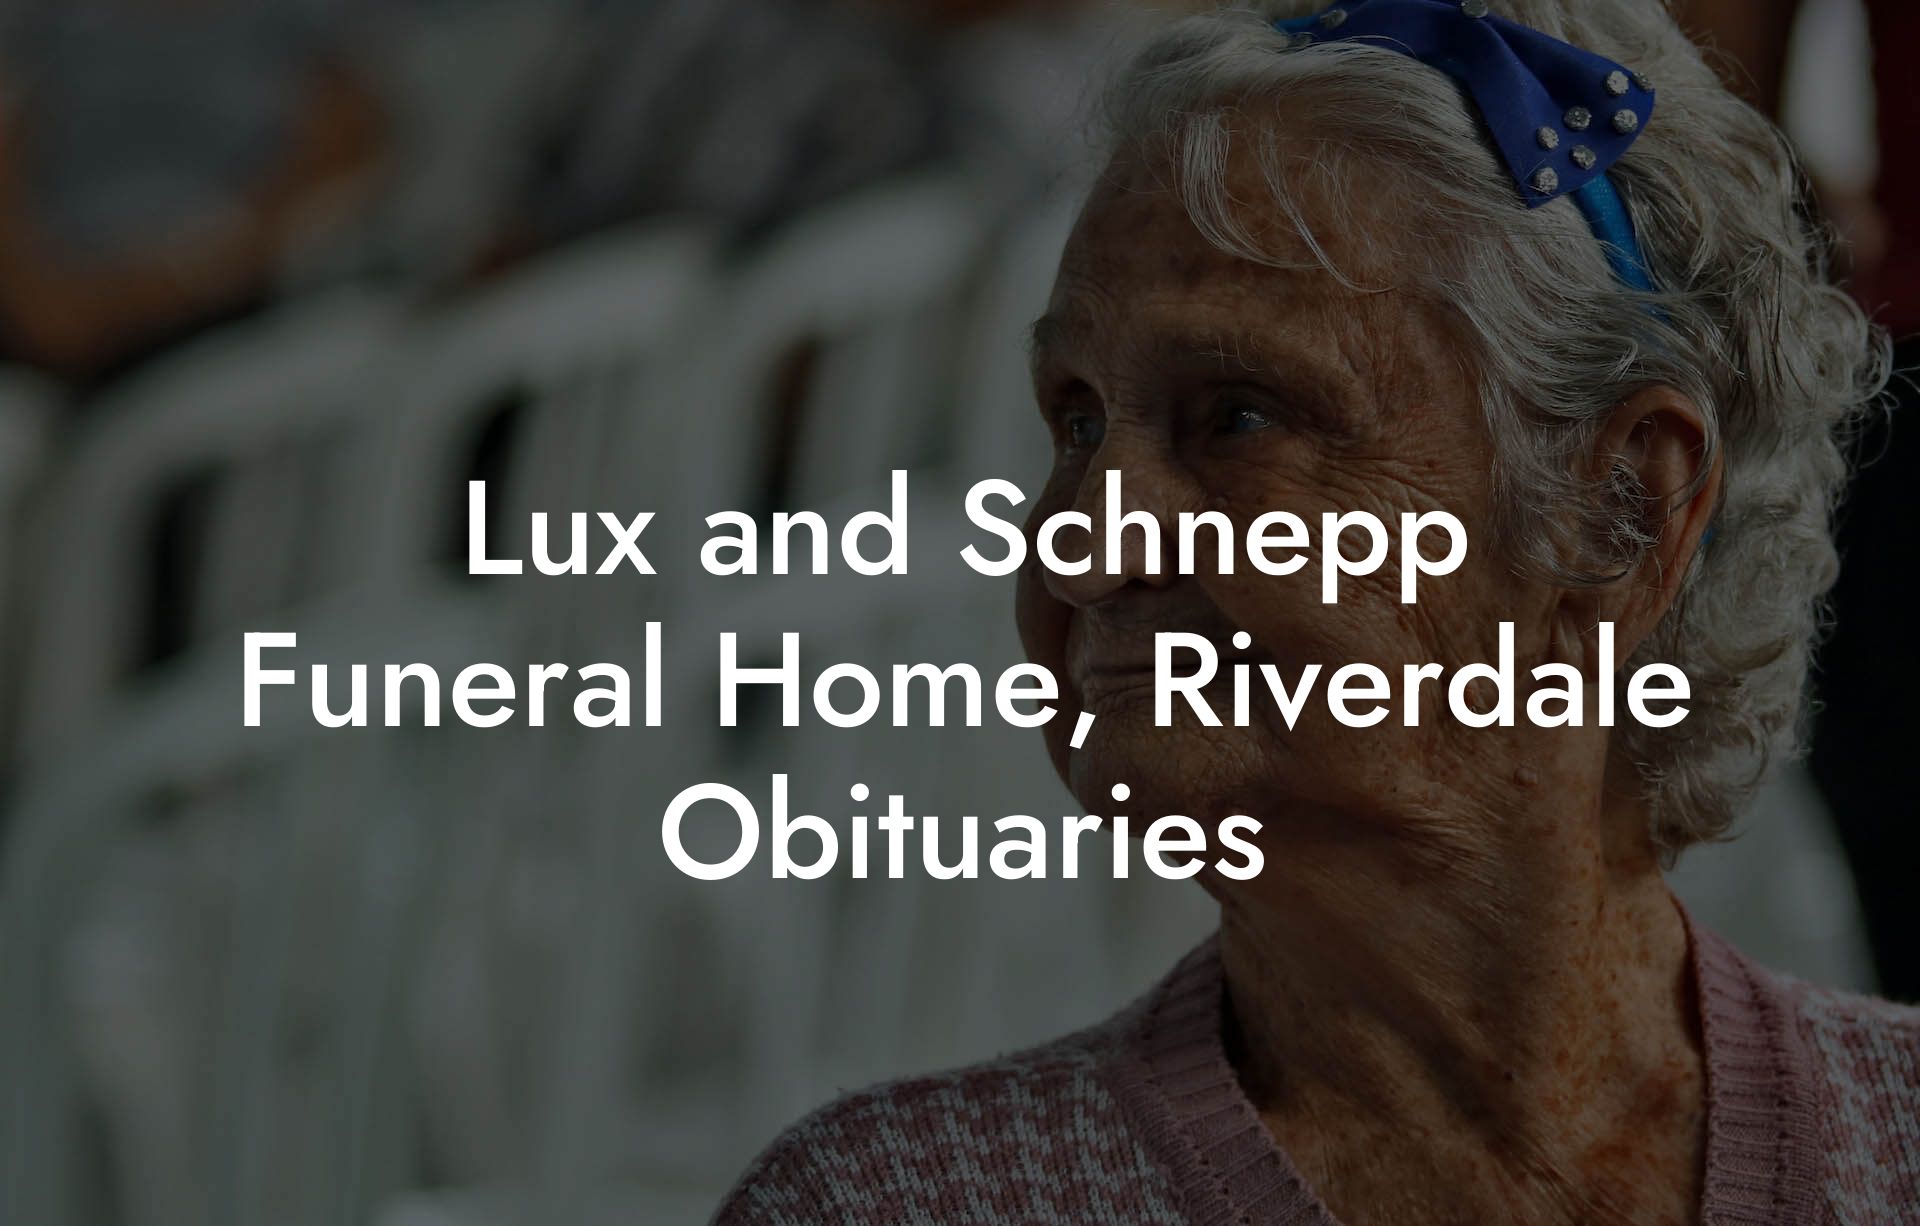 Lux and Schnepp Funeral Home, Riverdale Obituaries